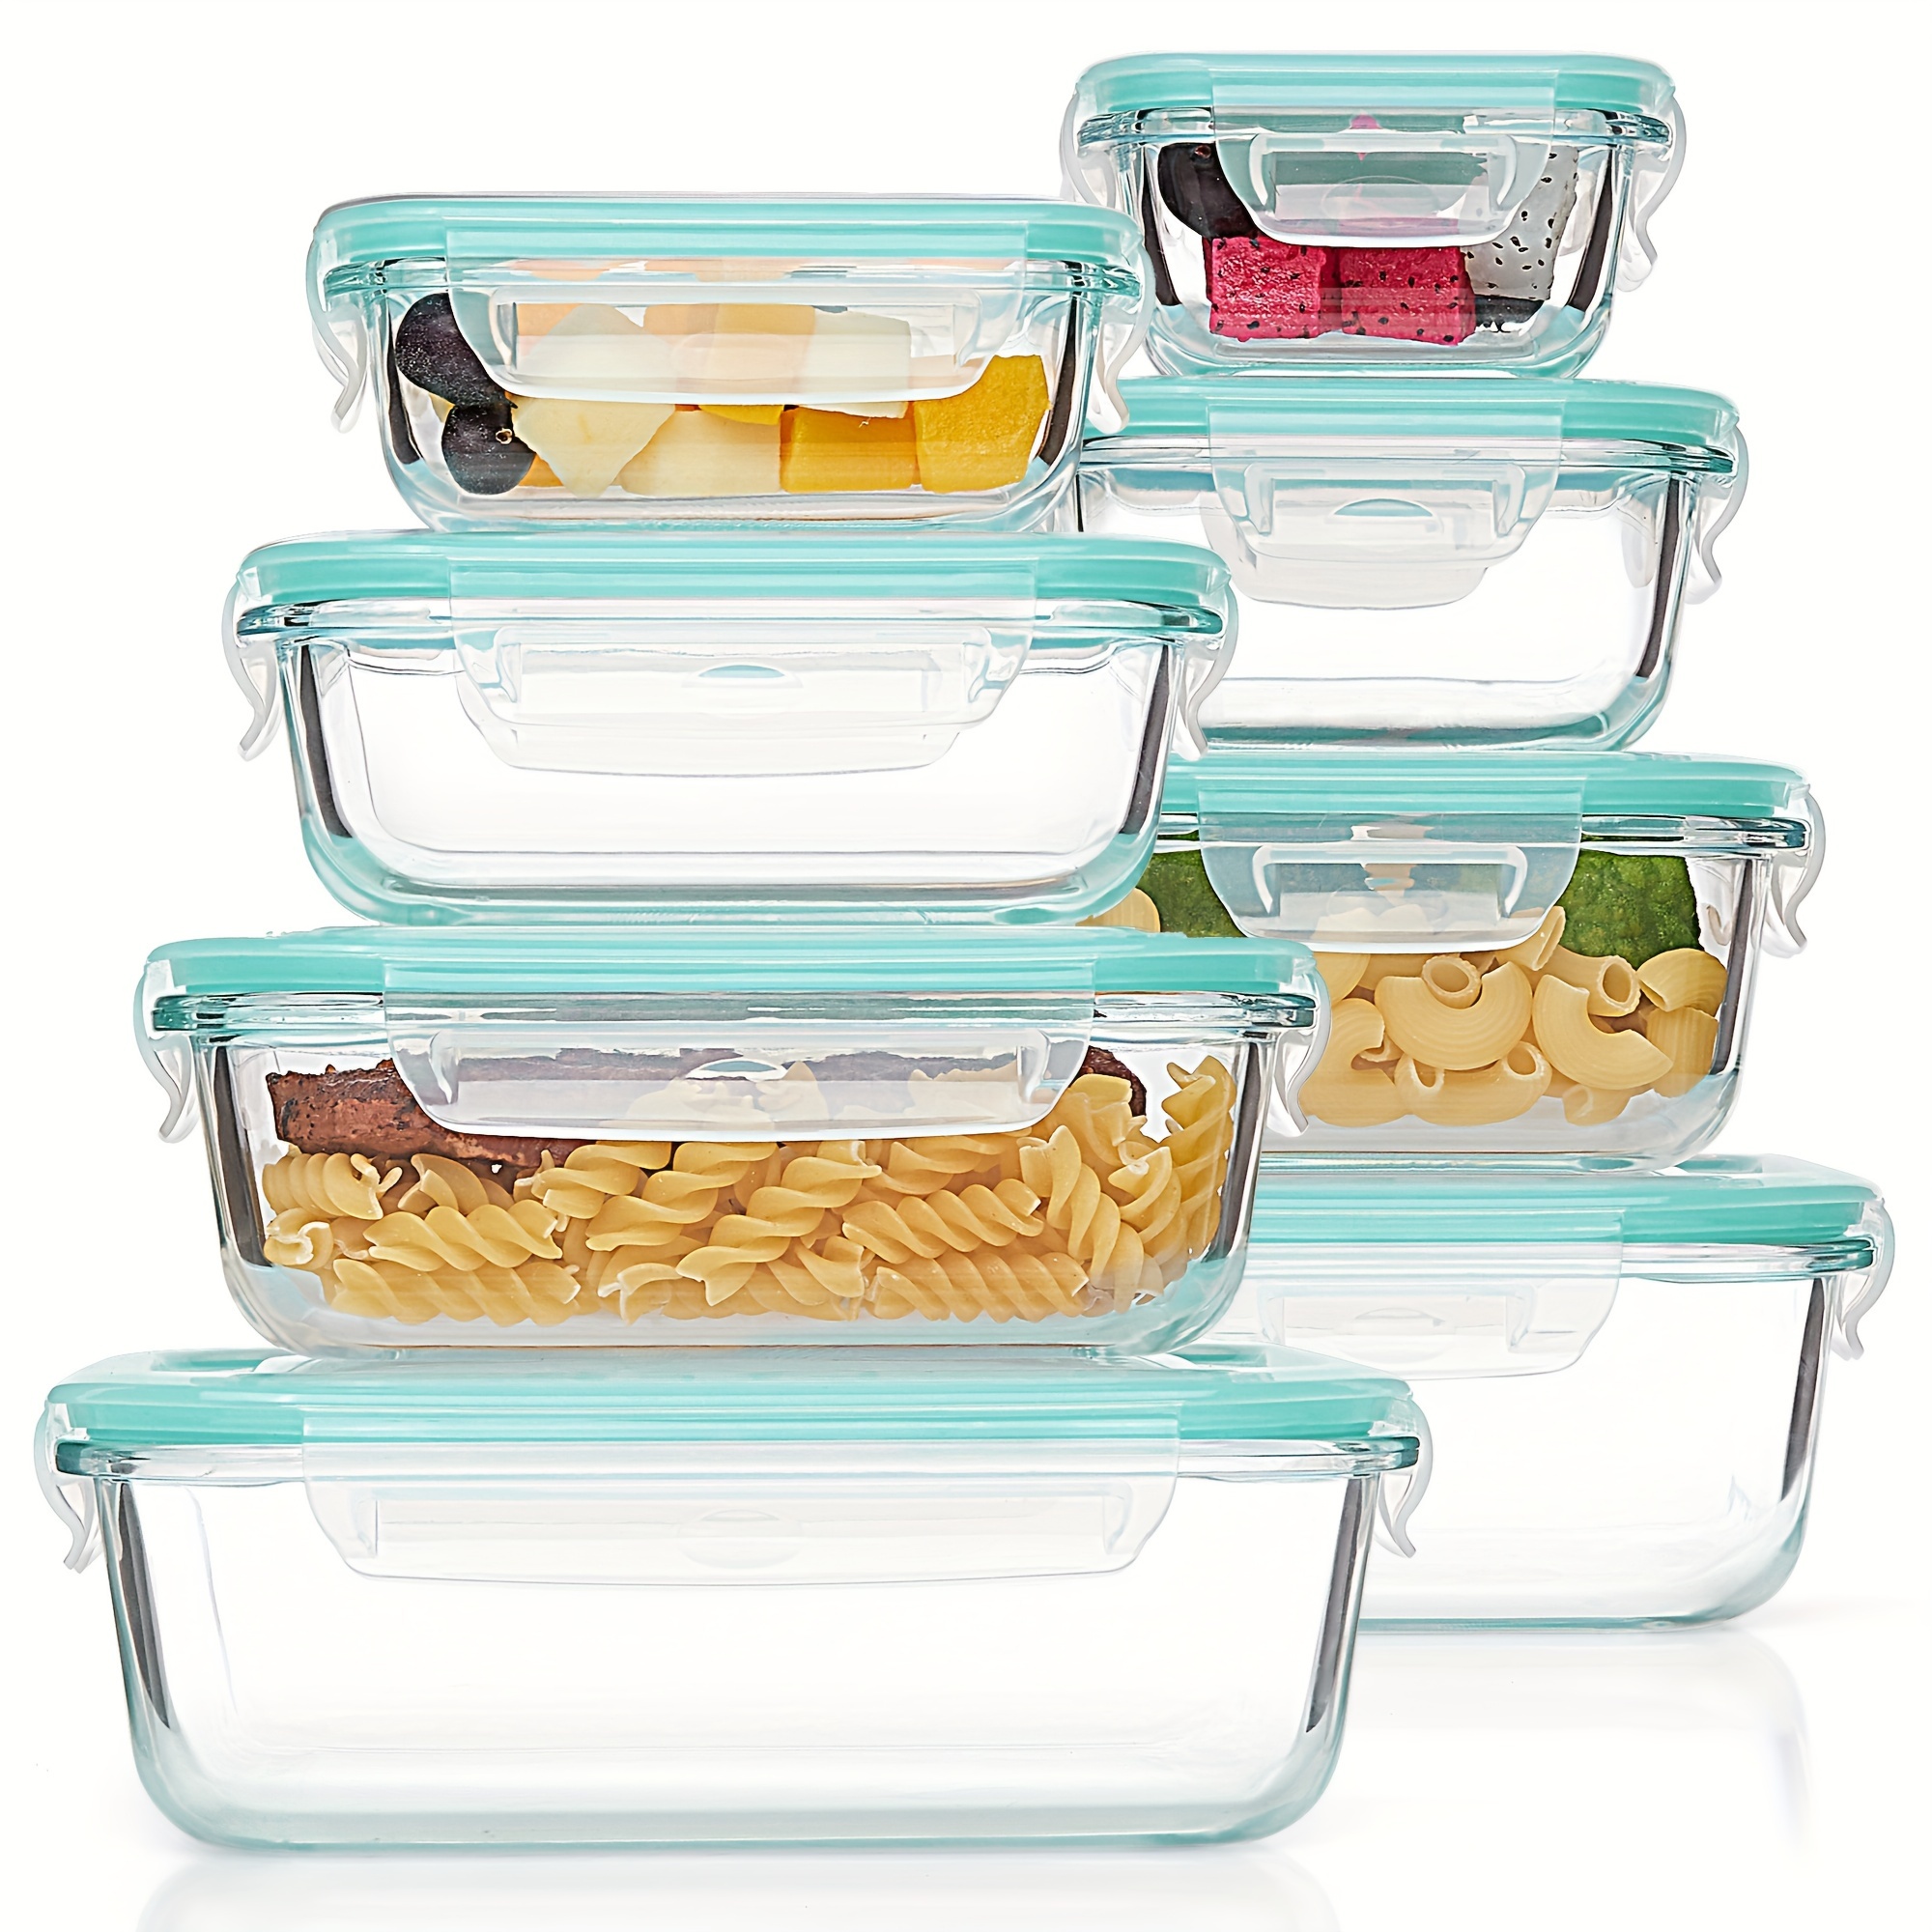 

8 Pack Glass Food Storage Containers, Meal Prep, Airtight Bento Boxes With Leak Proof Locking Lids, For Microwave, Oven, Freezer And Dishwasher, Bpa Free